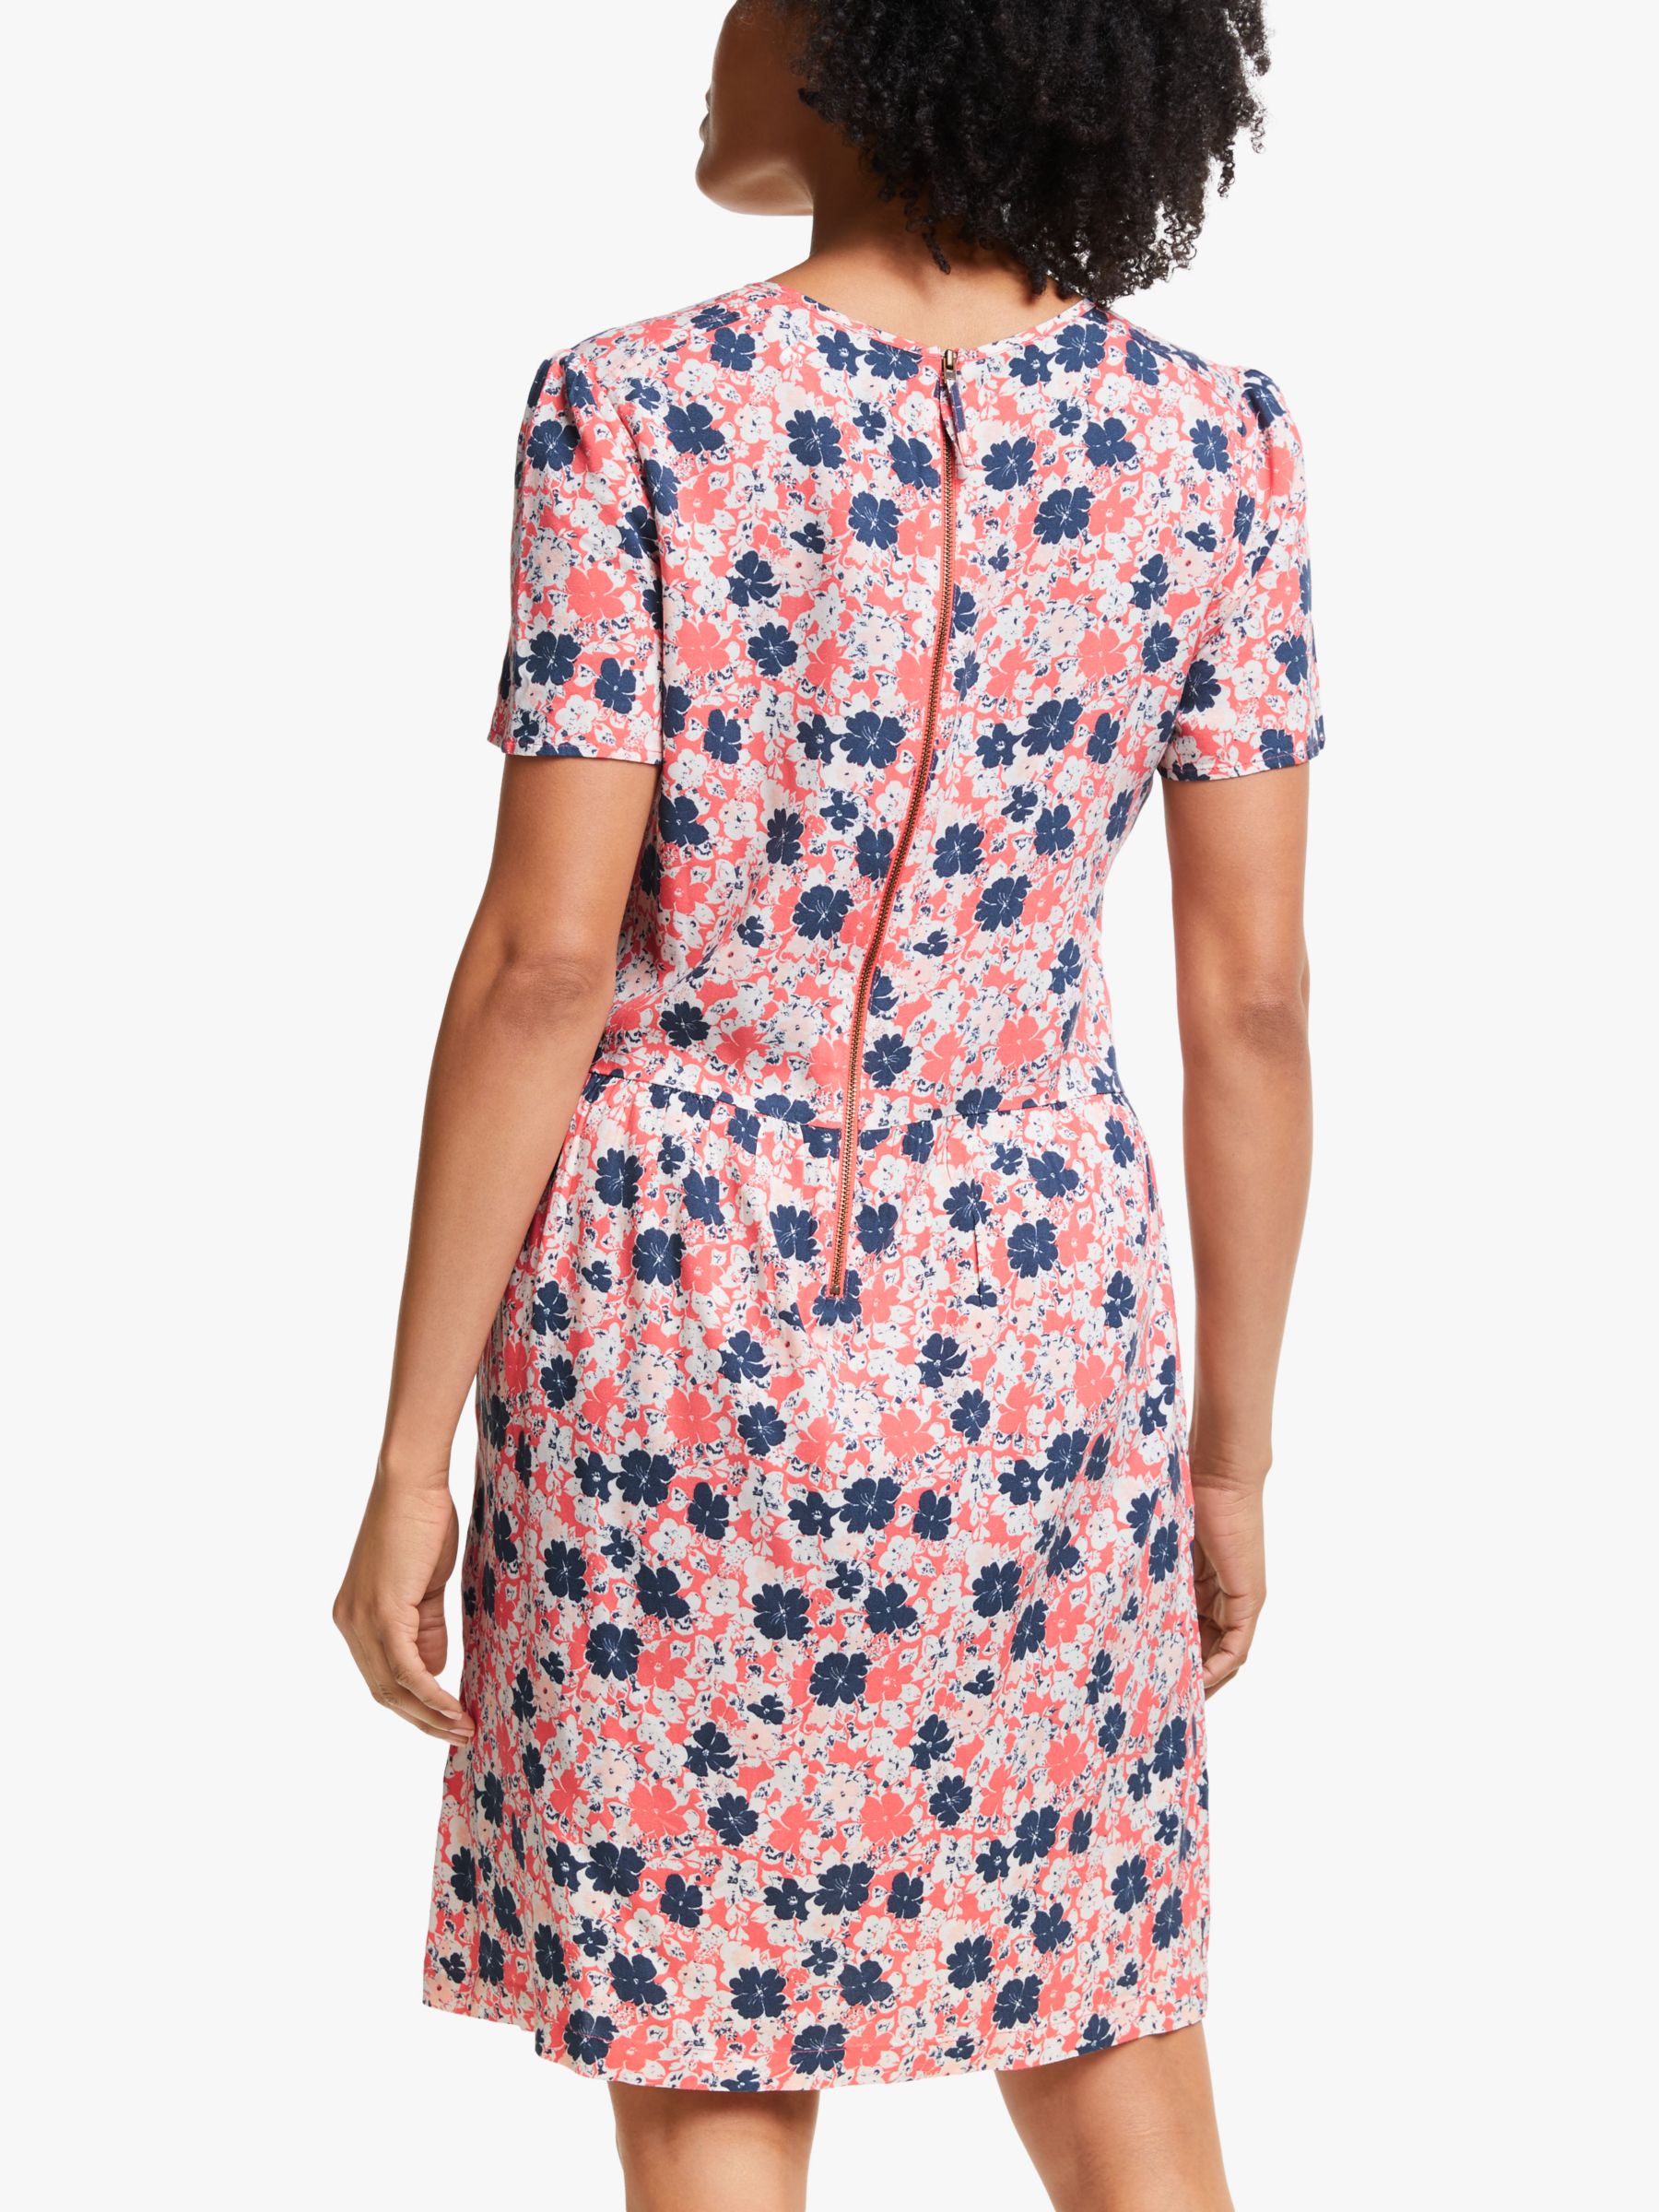 Collection WEEKEND by John Lewis Floral Shift Dress, Pink/Multi at John